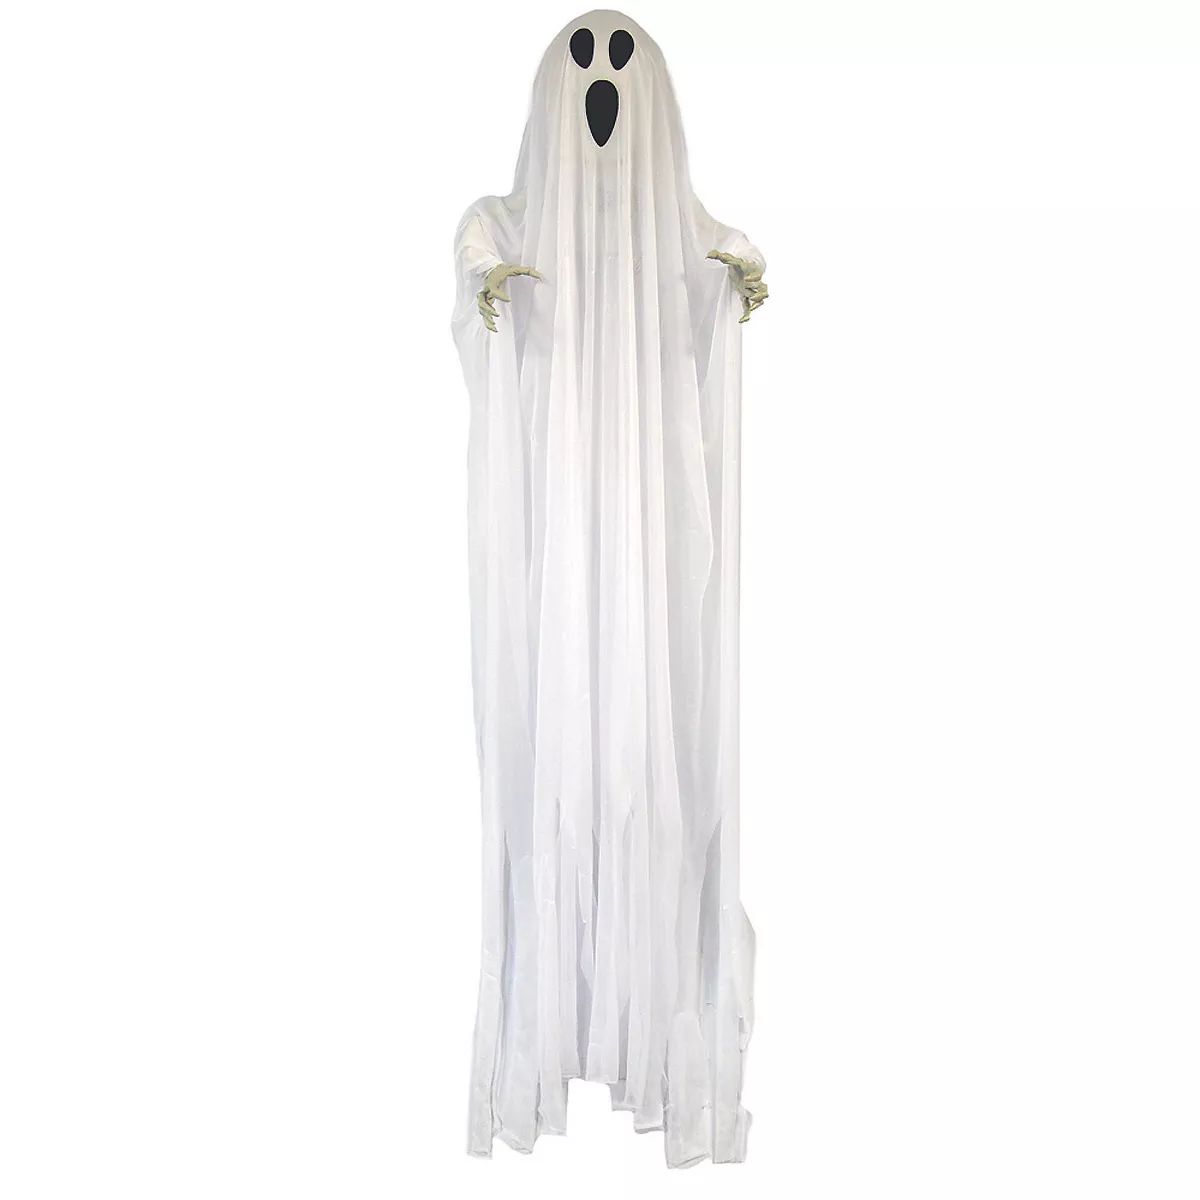 Halloween Express  5 ft Shaking Ghost Decoration | Target